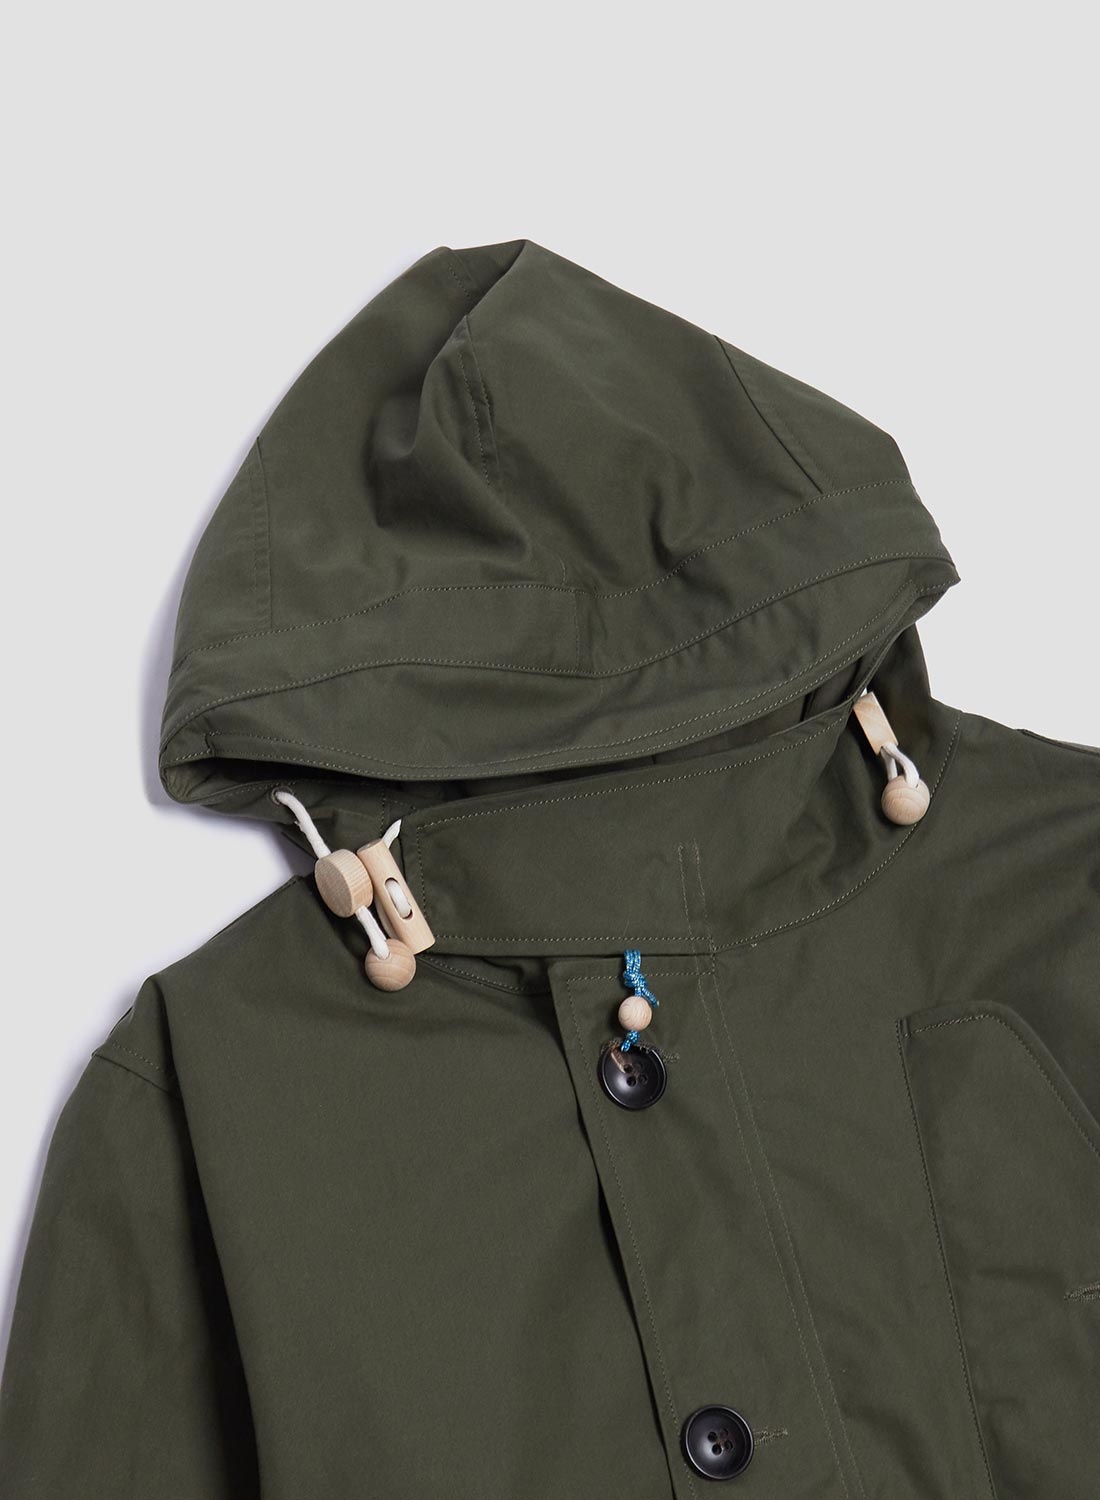 Nigel Cabourn Cold Weather Parka in Olive | REVERSIBLE